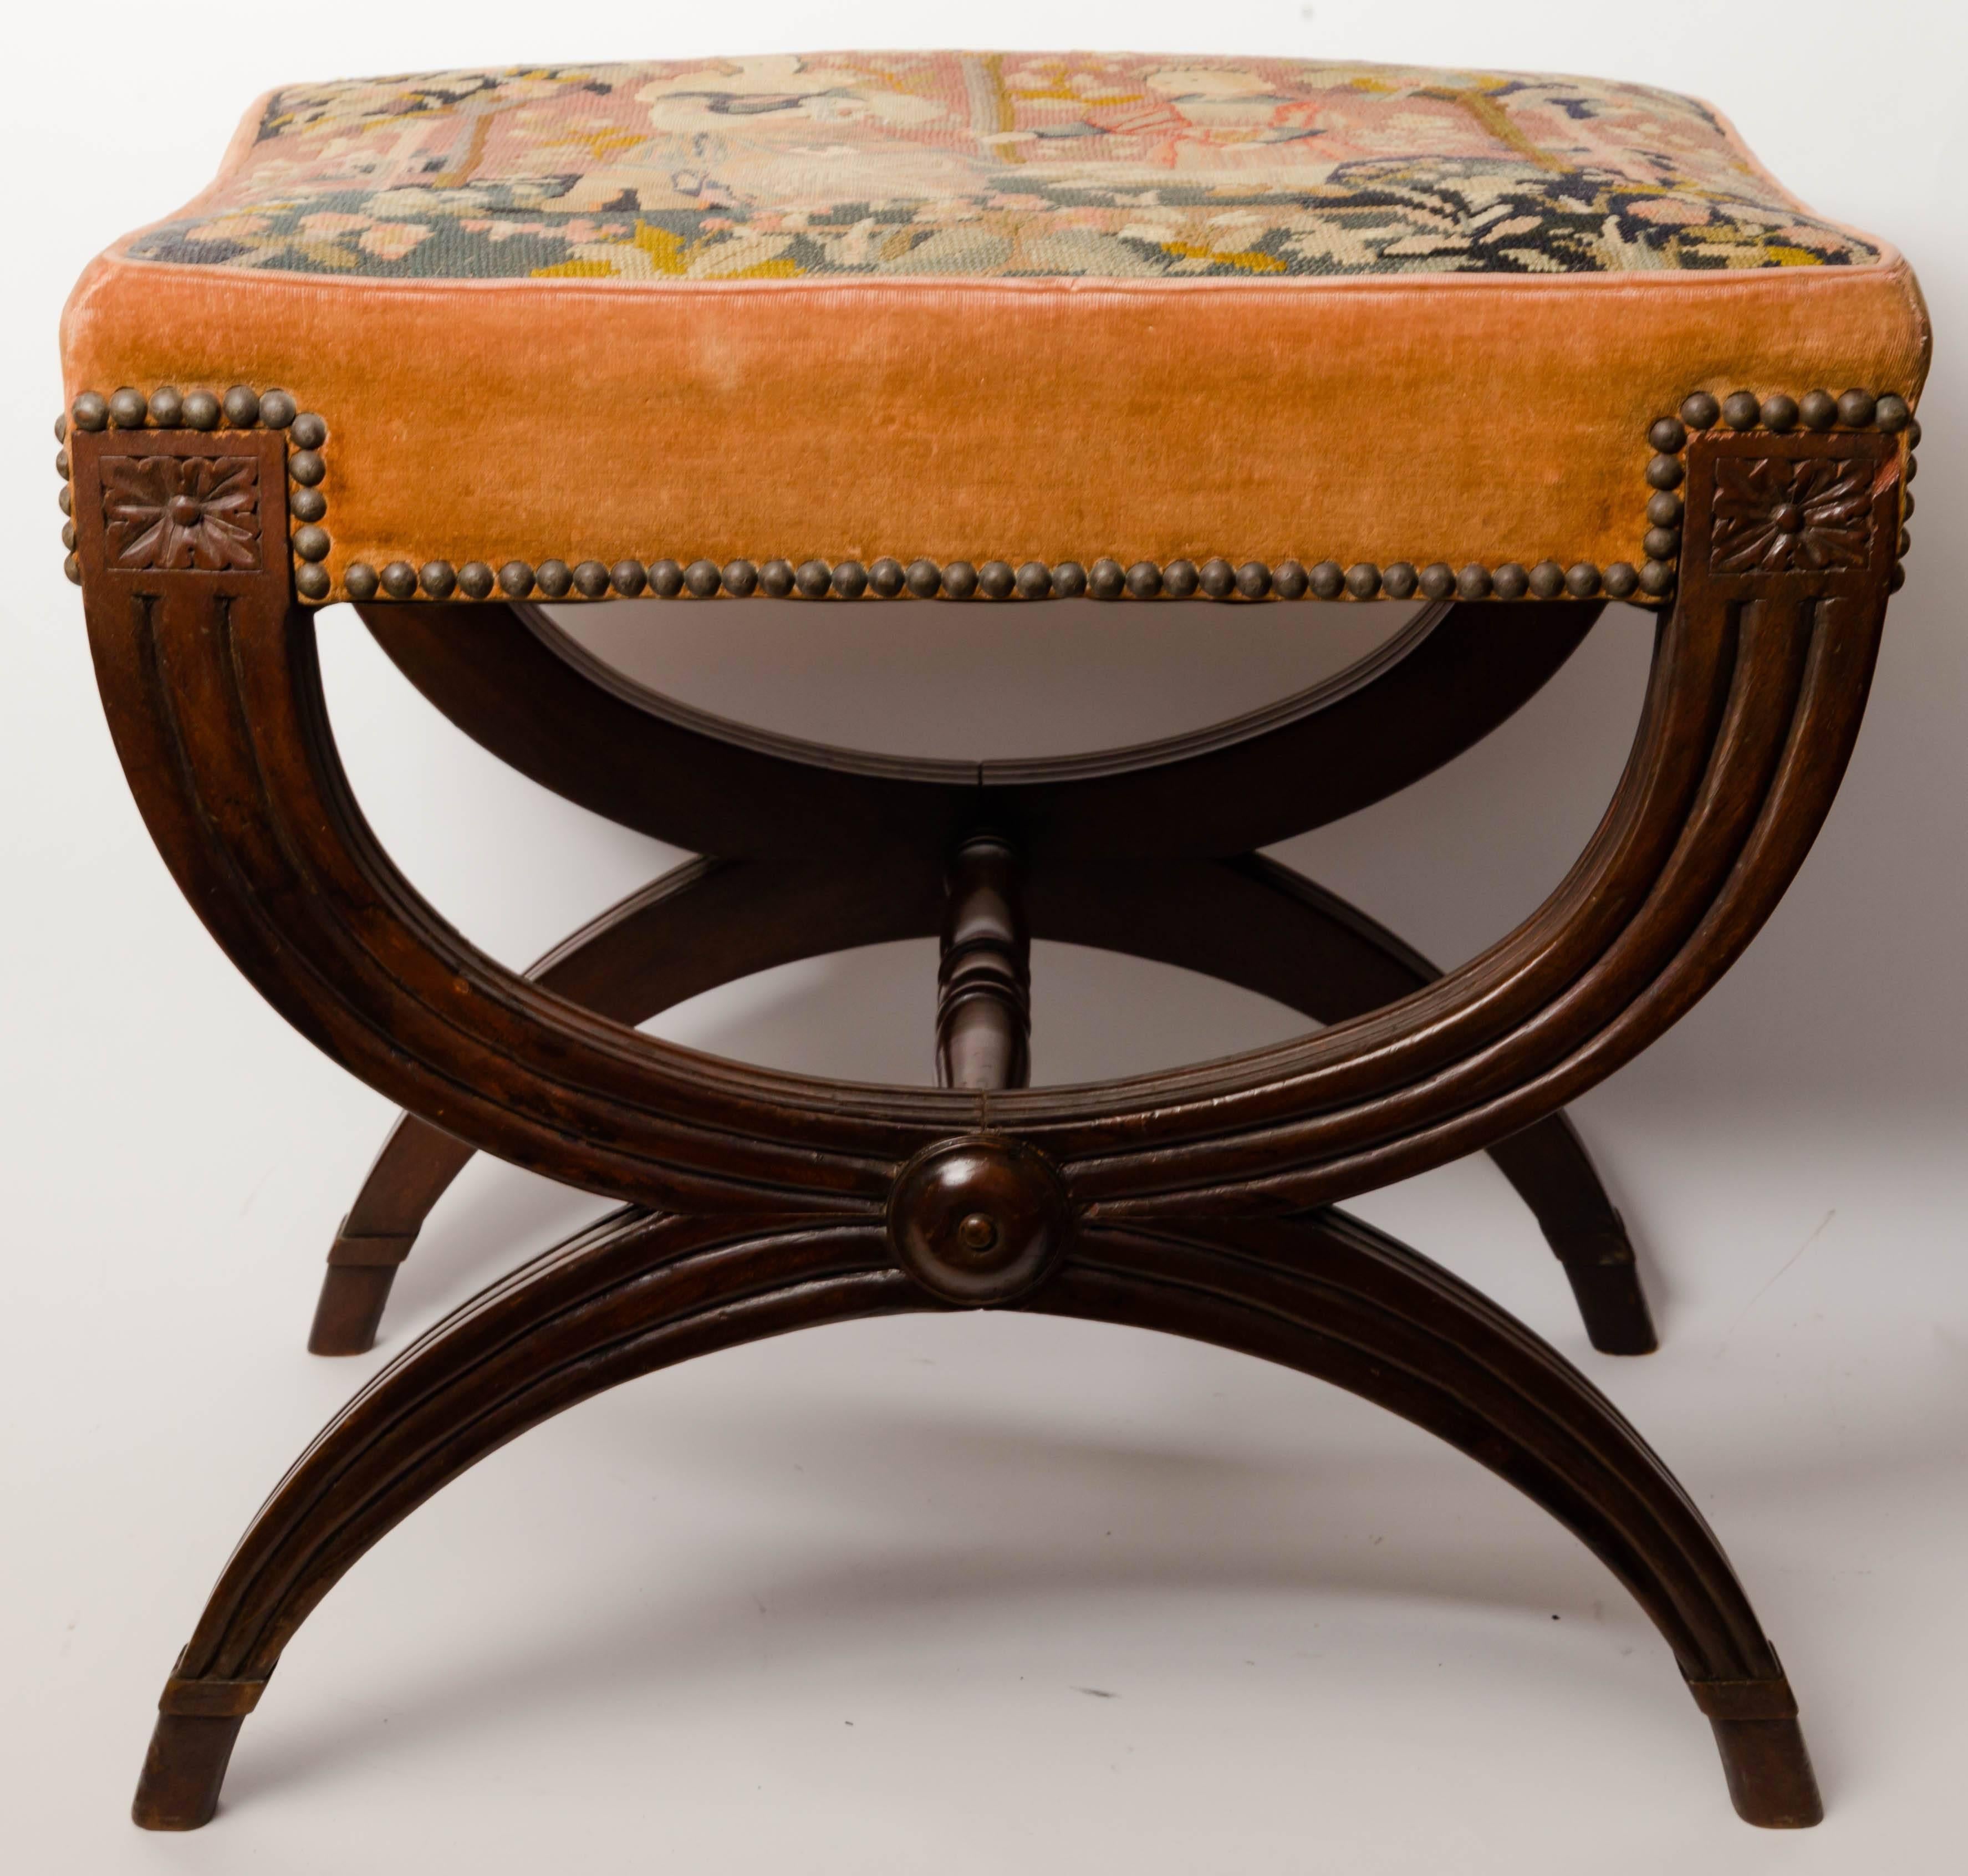 Carved French Empire Style Mahogany Curule Base Stool with Needlework Top